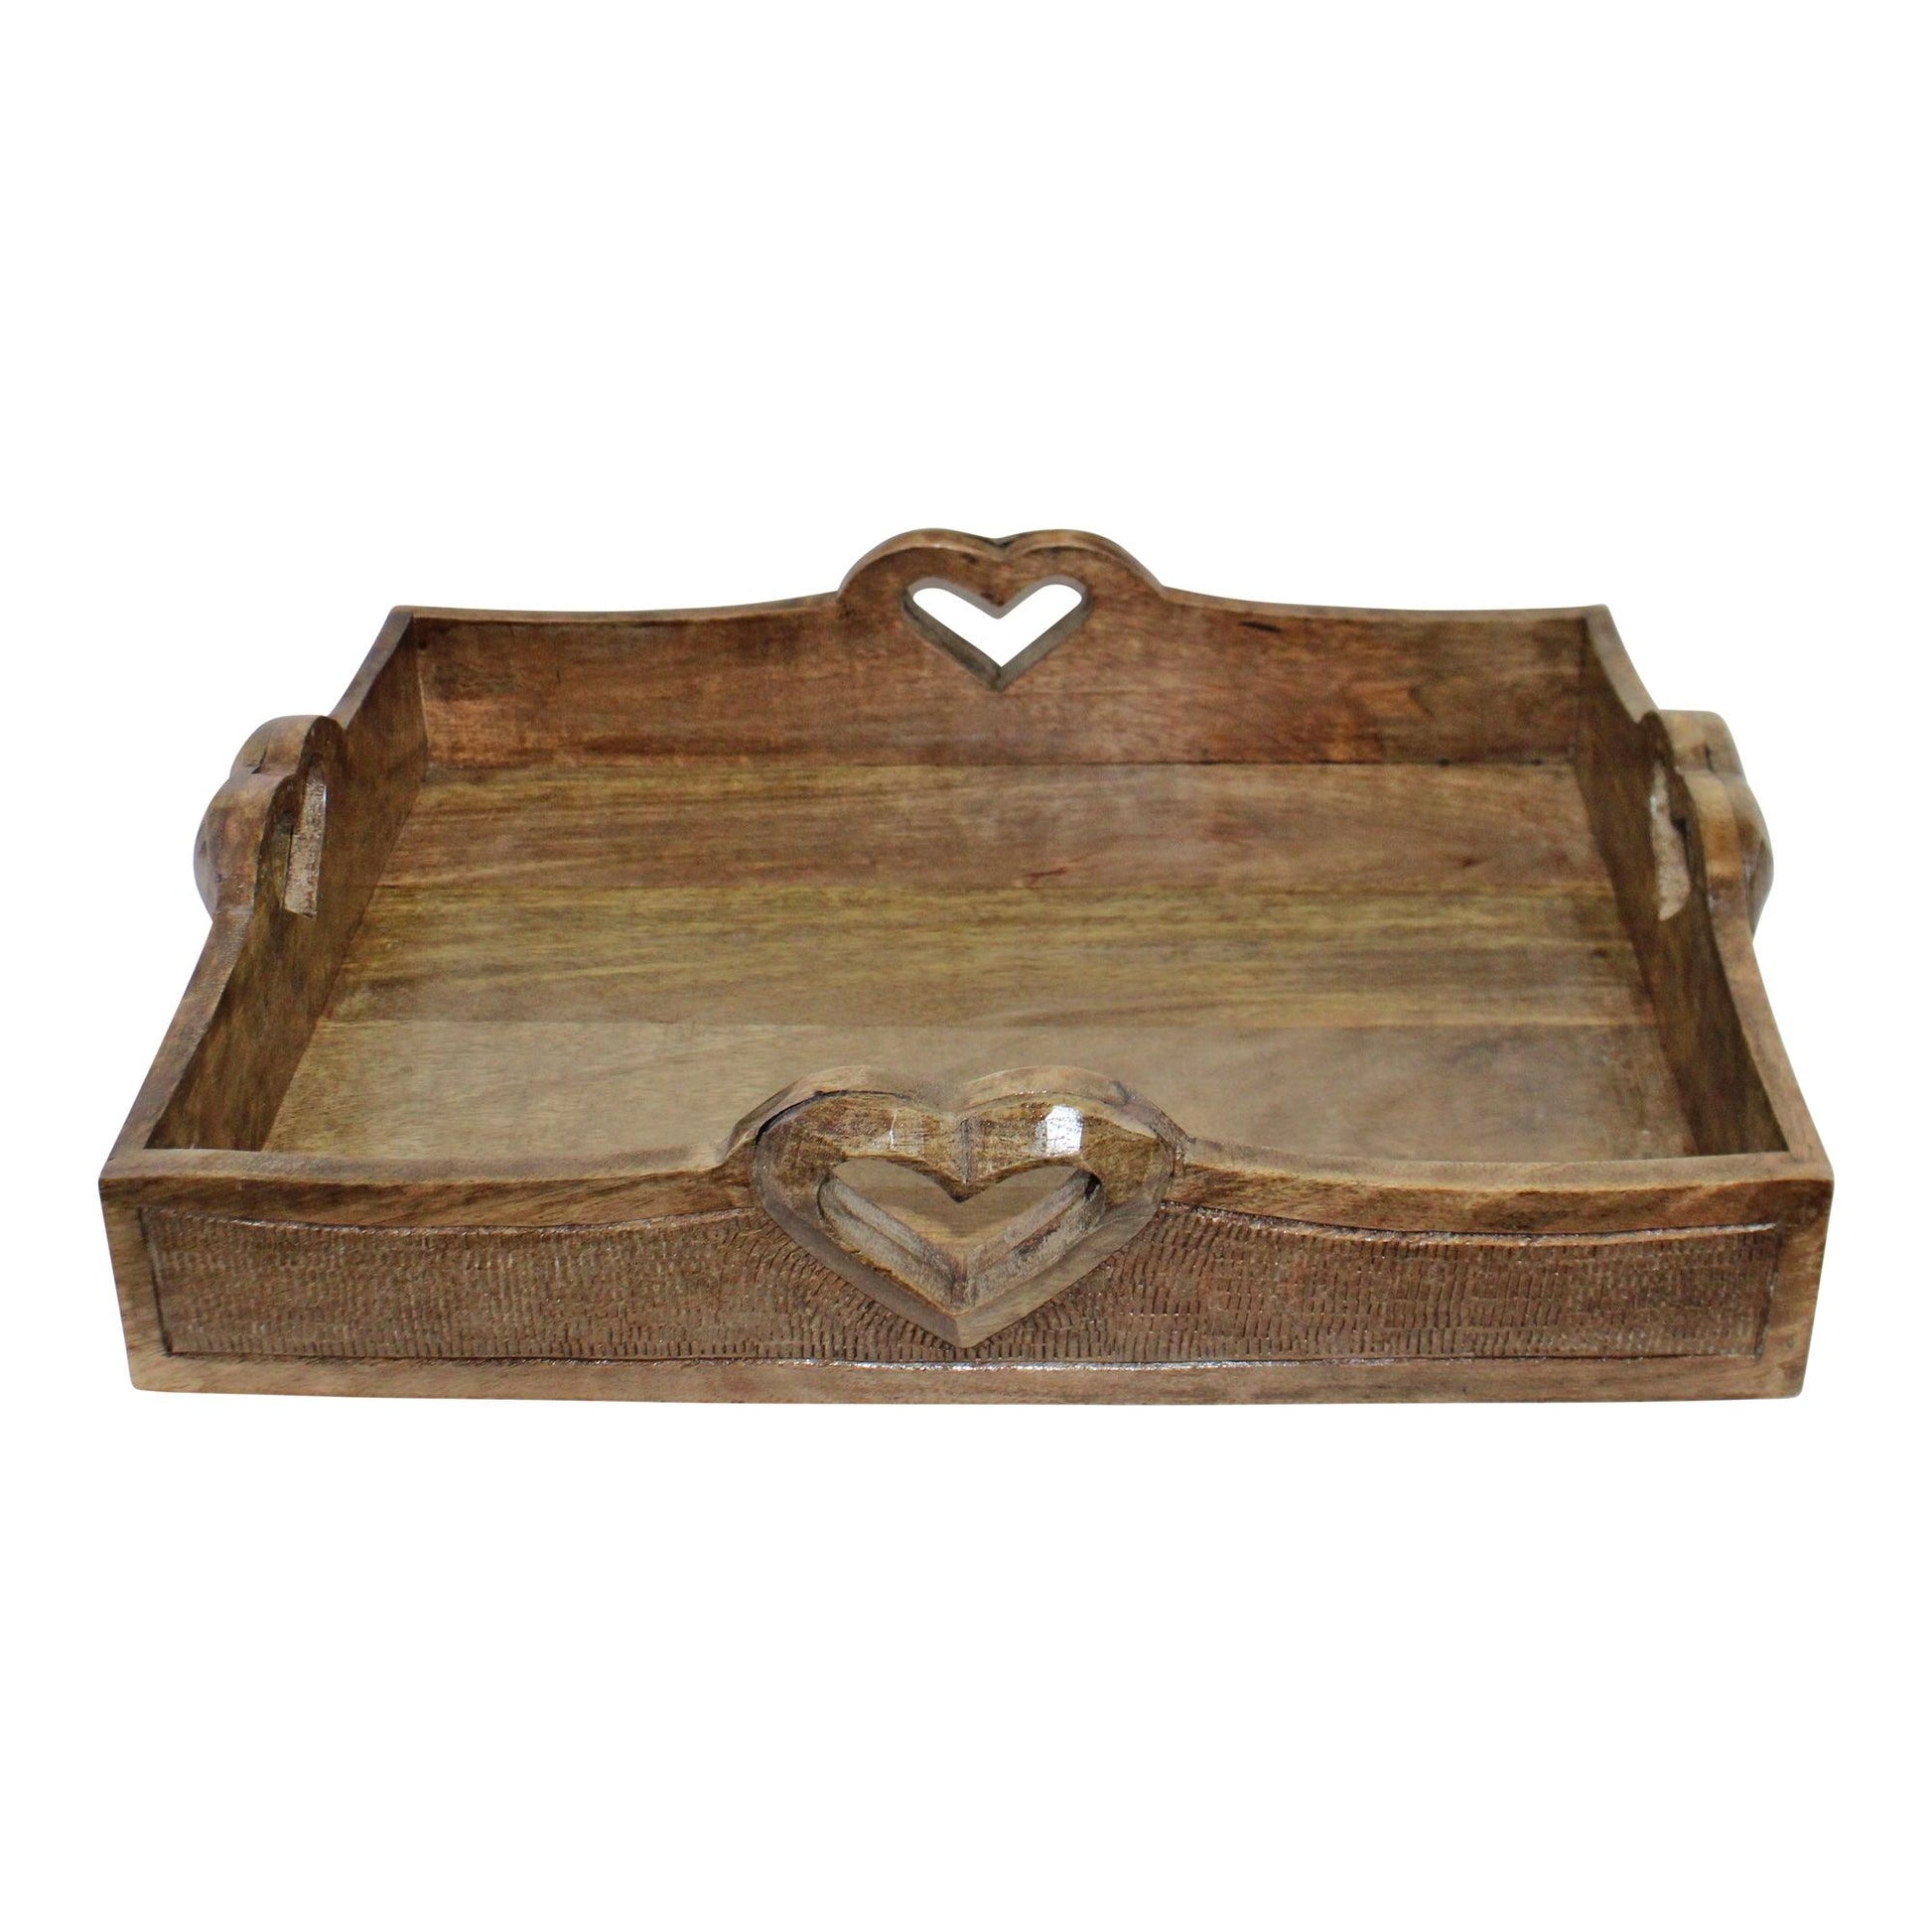 Set of 2 Rustic Wooden Heart Detail Serving Trays with Handles Large